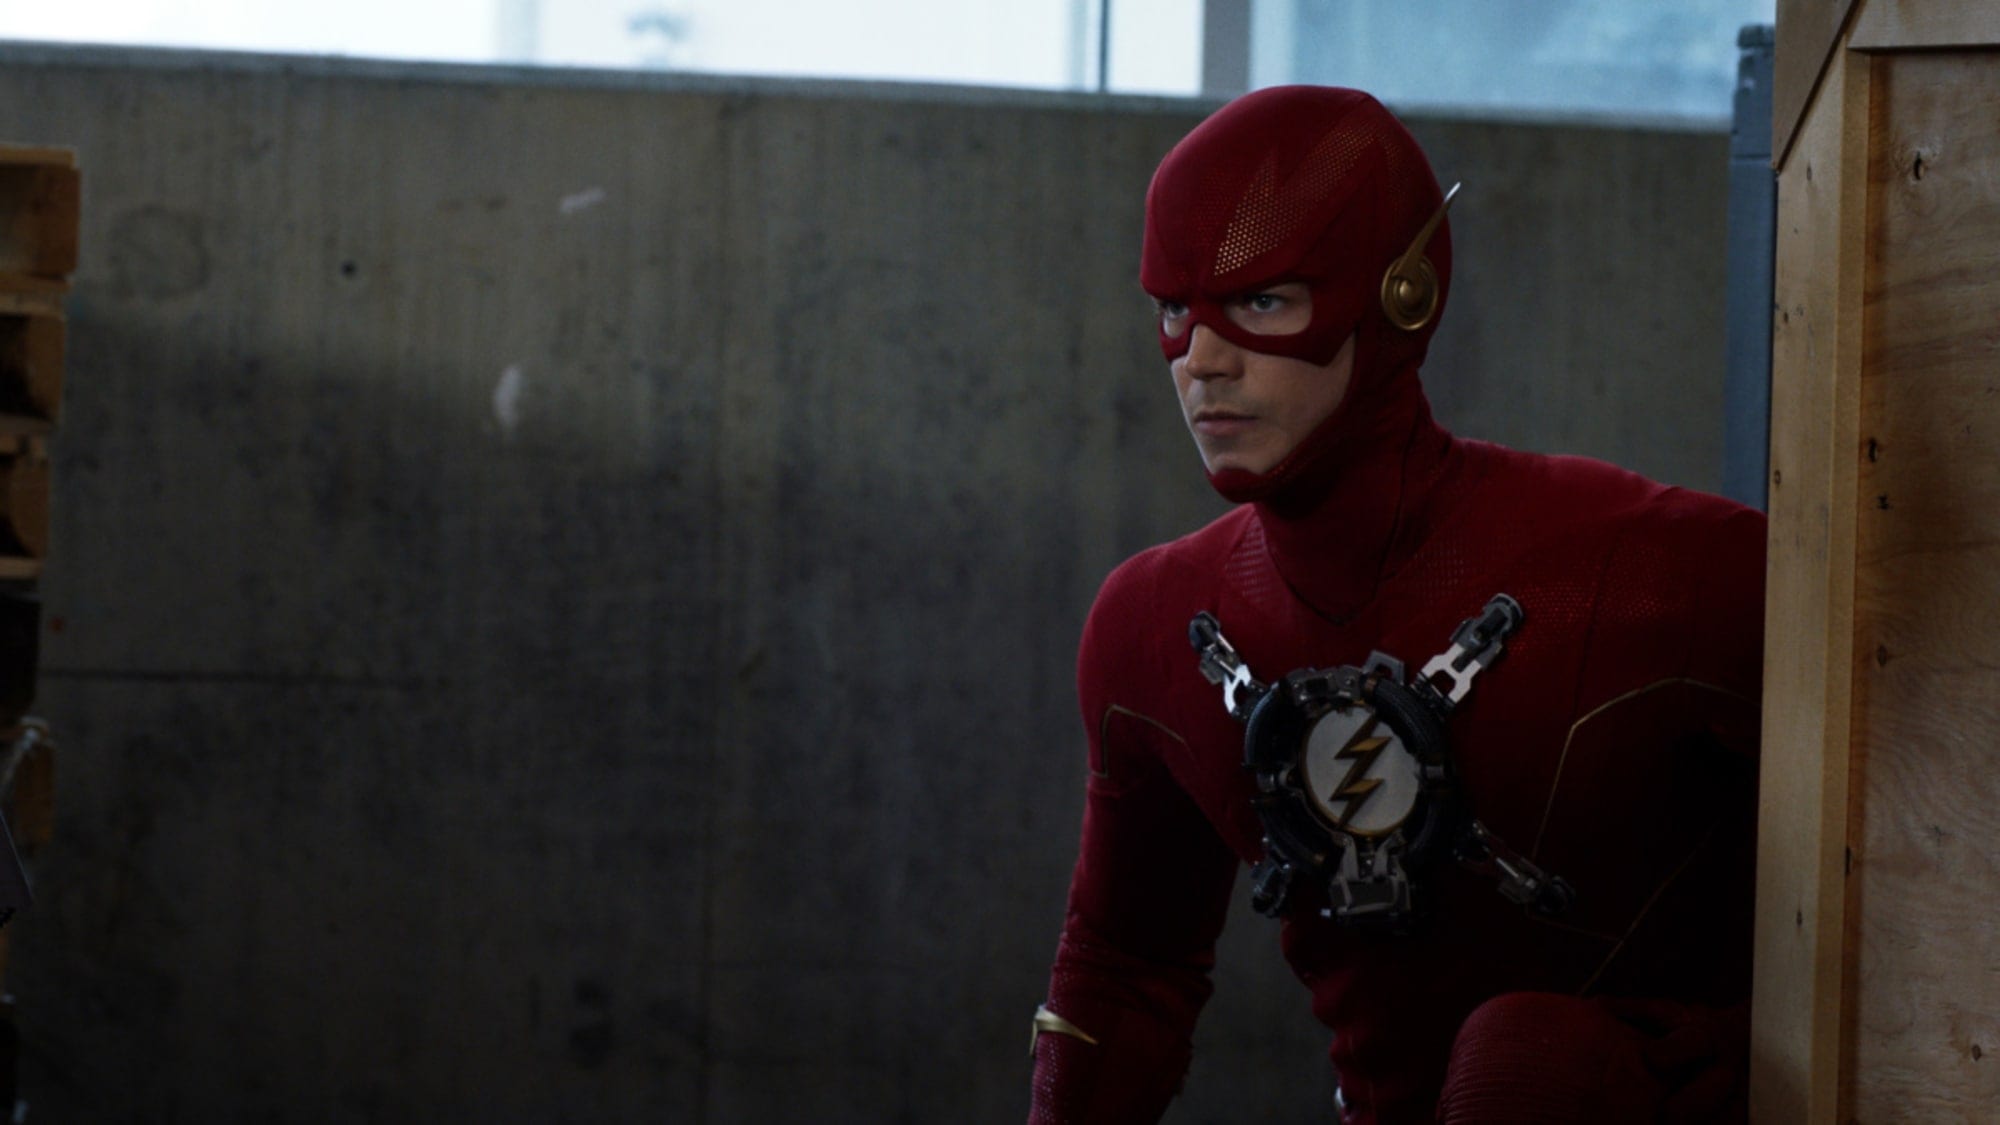 Preview And Release Date: The Flash Season 7 Episode 4